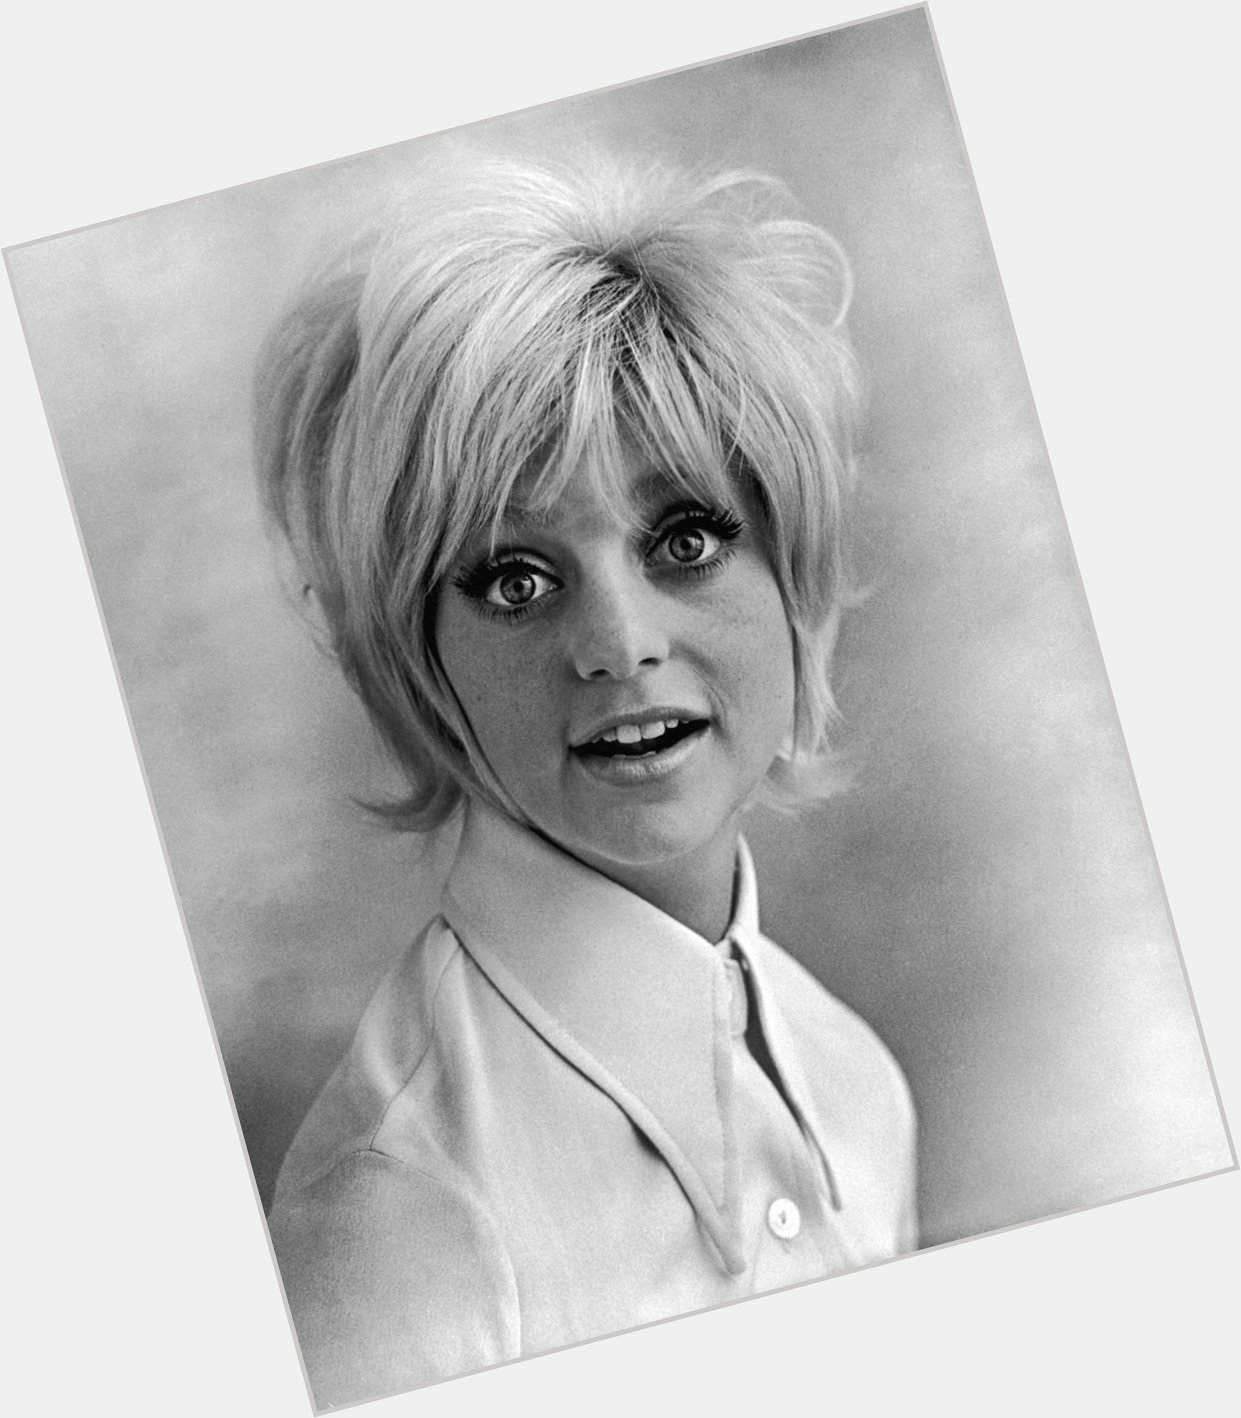 Happy 72nd Birthday to the legendary Oscar-winning actress Goldie Hawn! (November 21, 1945) 